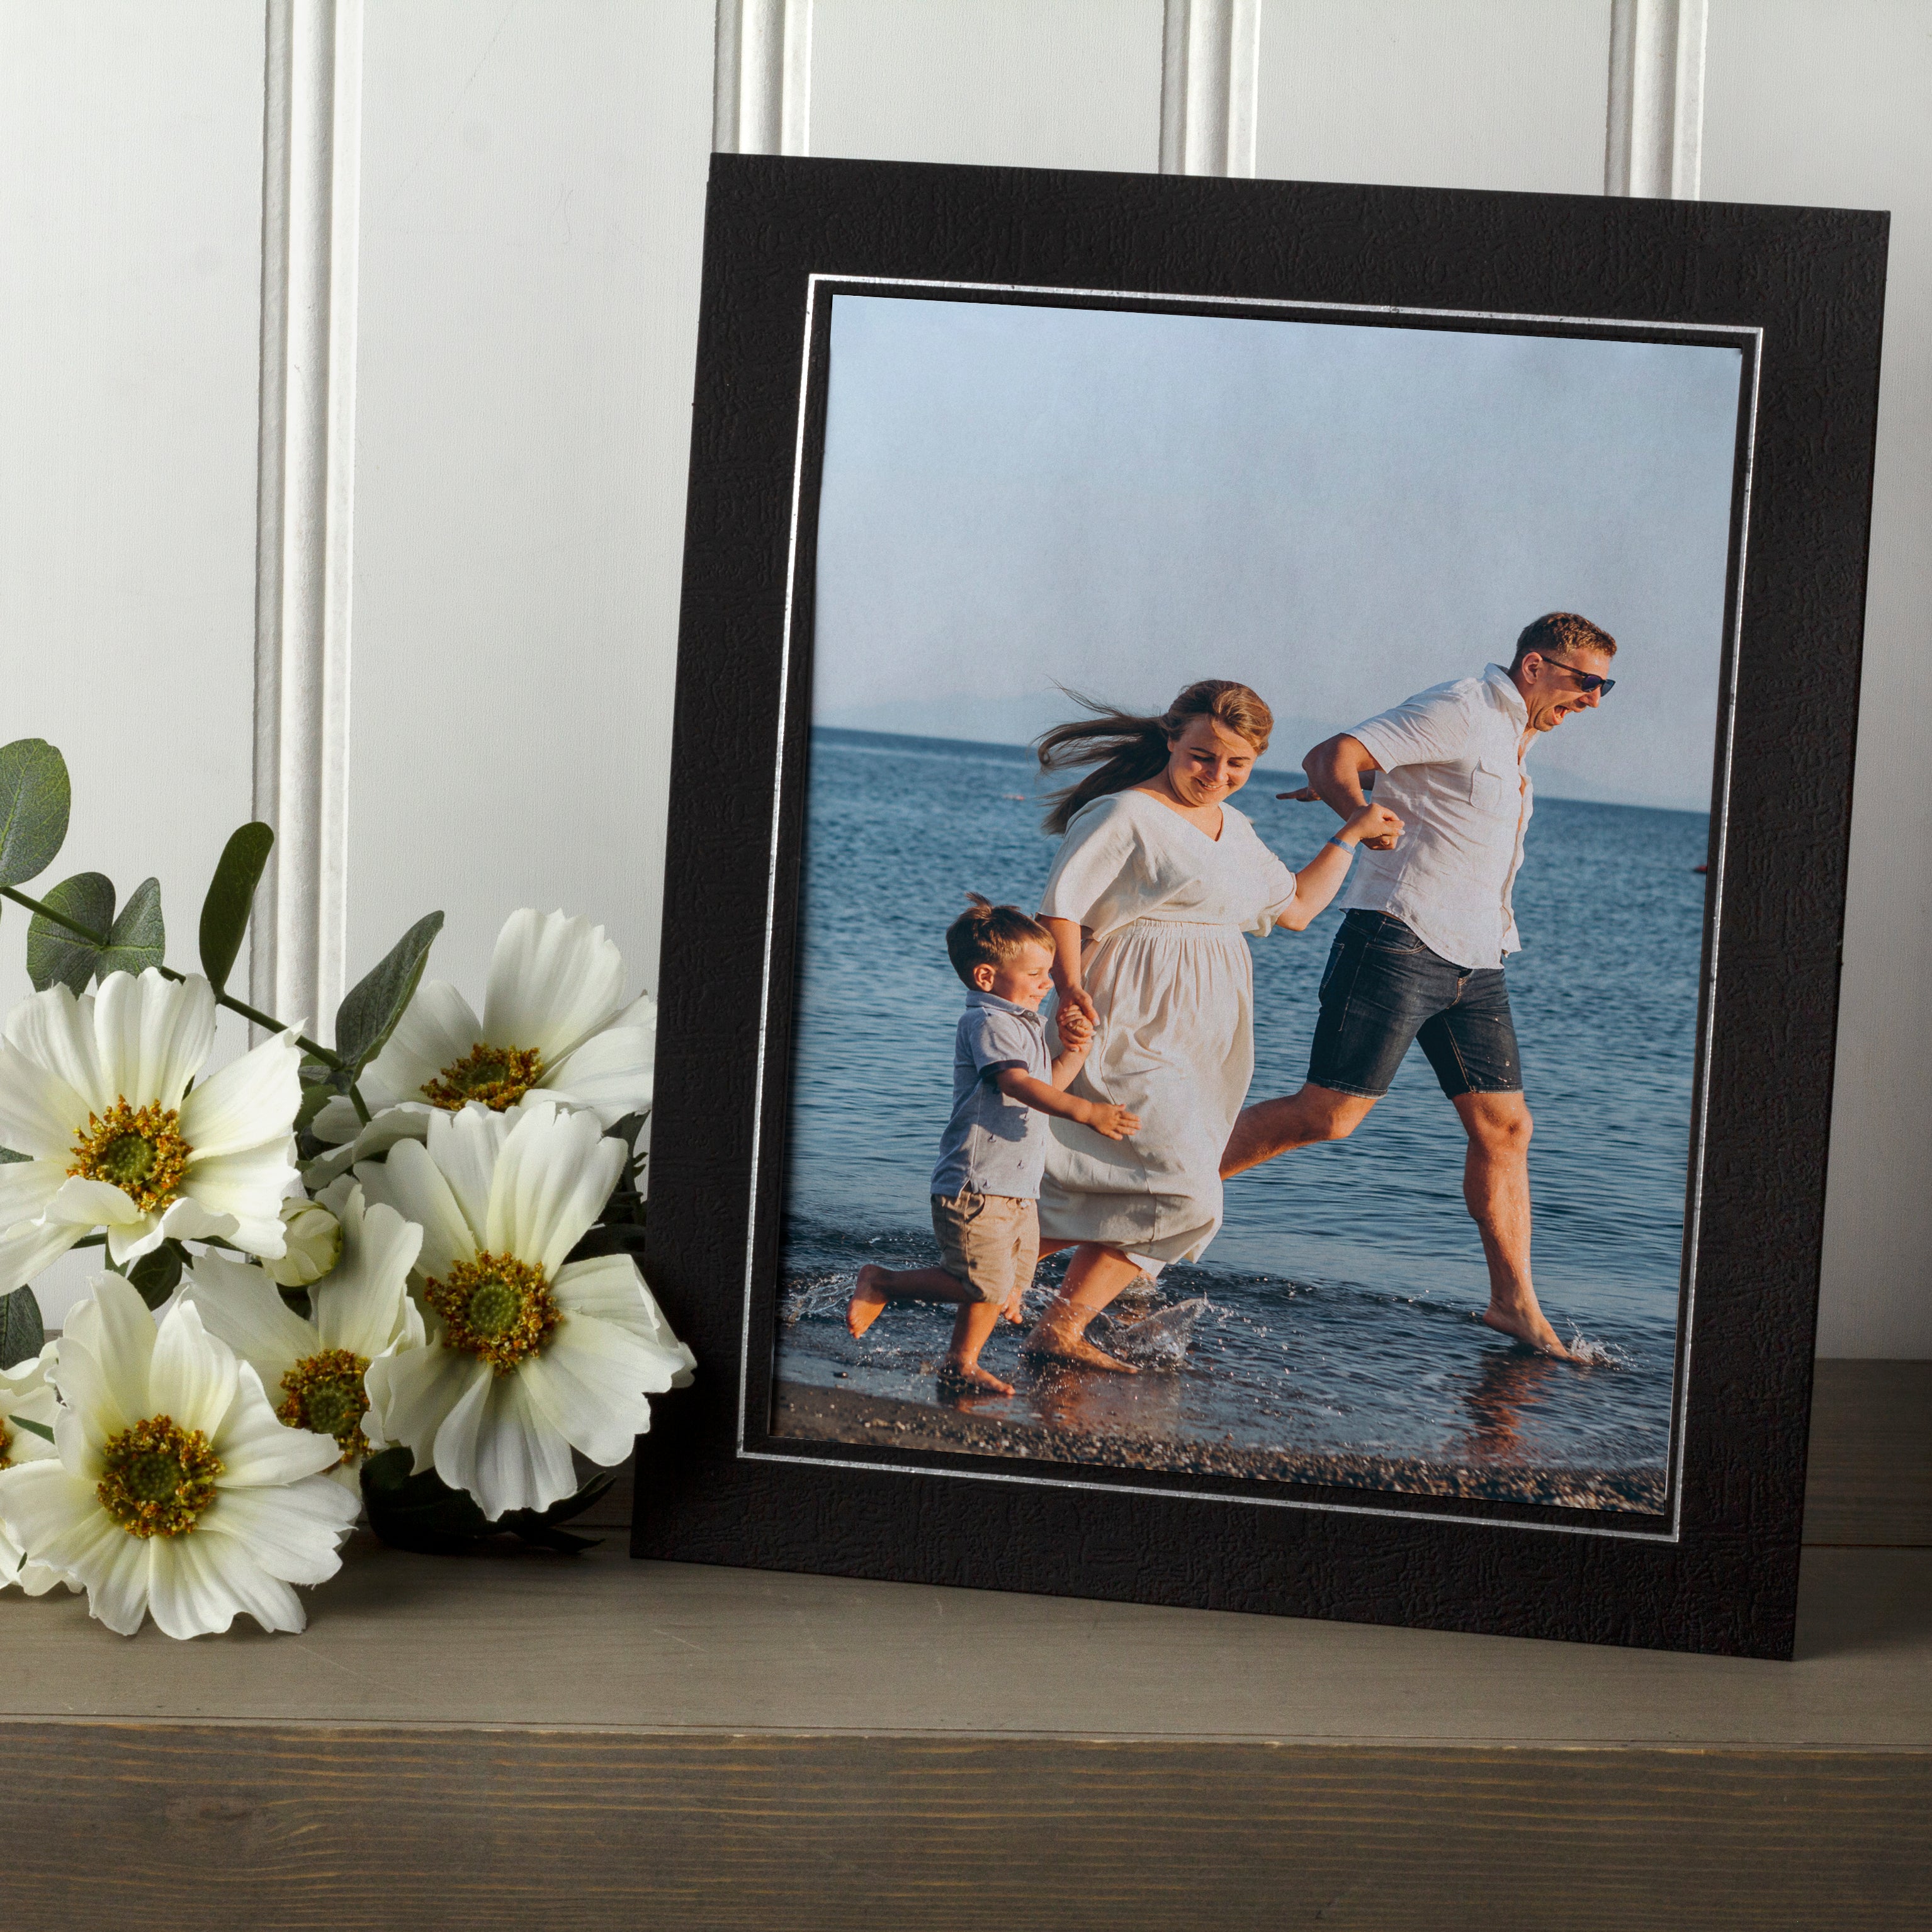 Wholesale picture frame stands easel With Recreational Features 